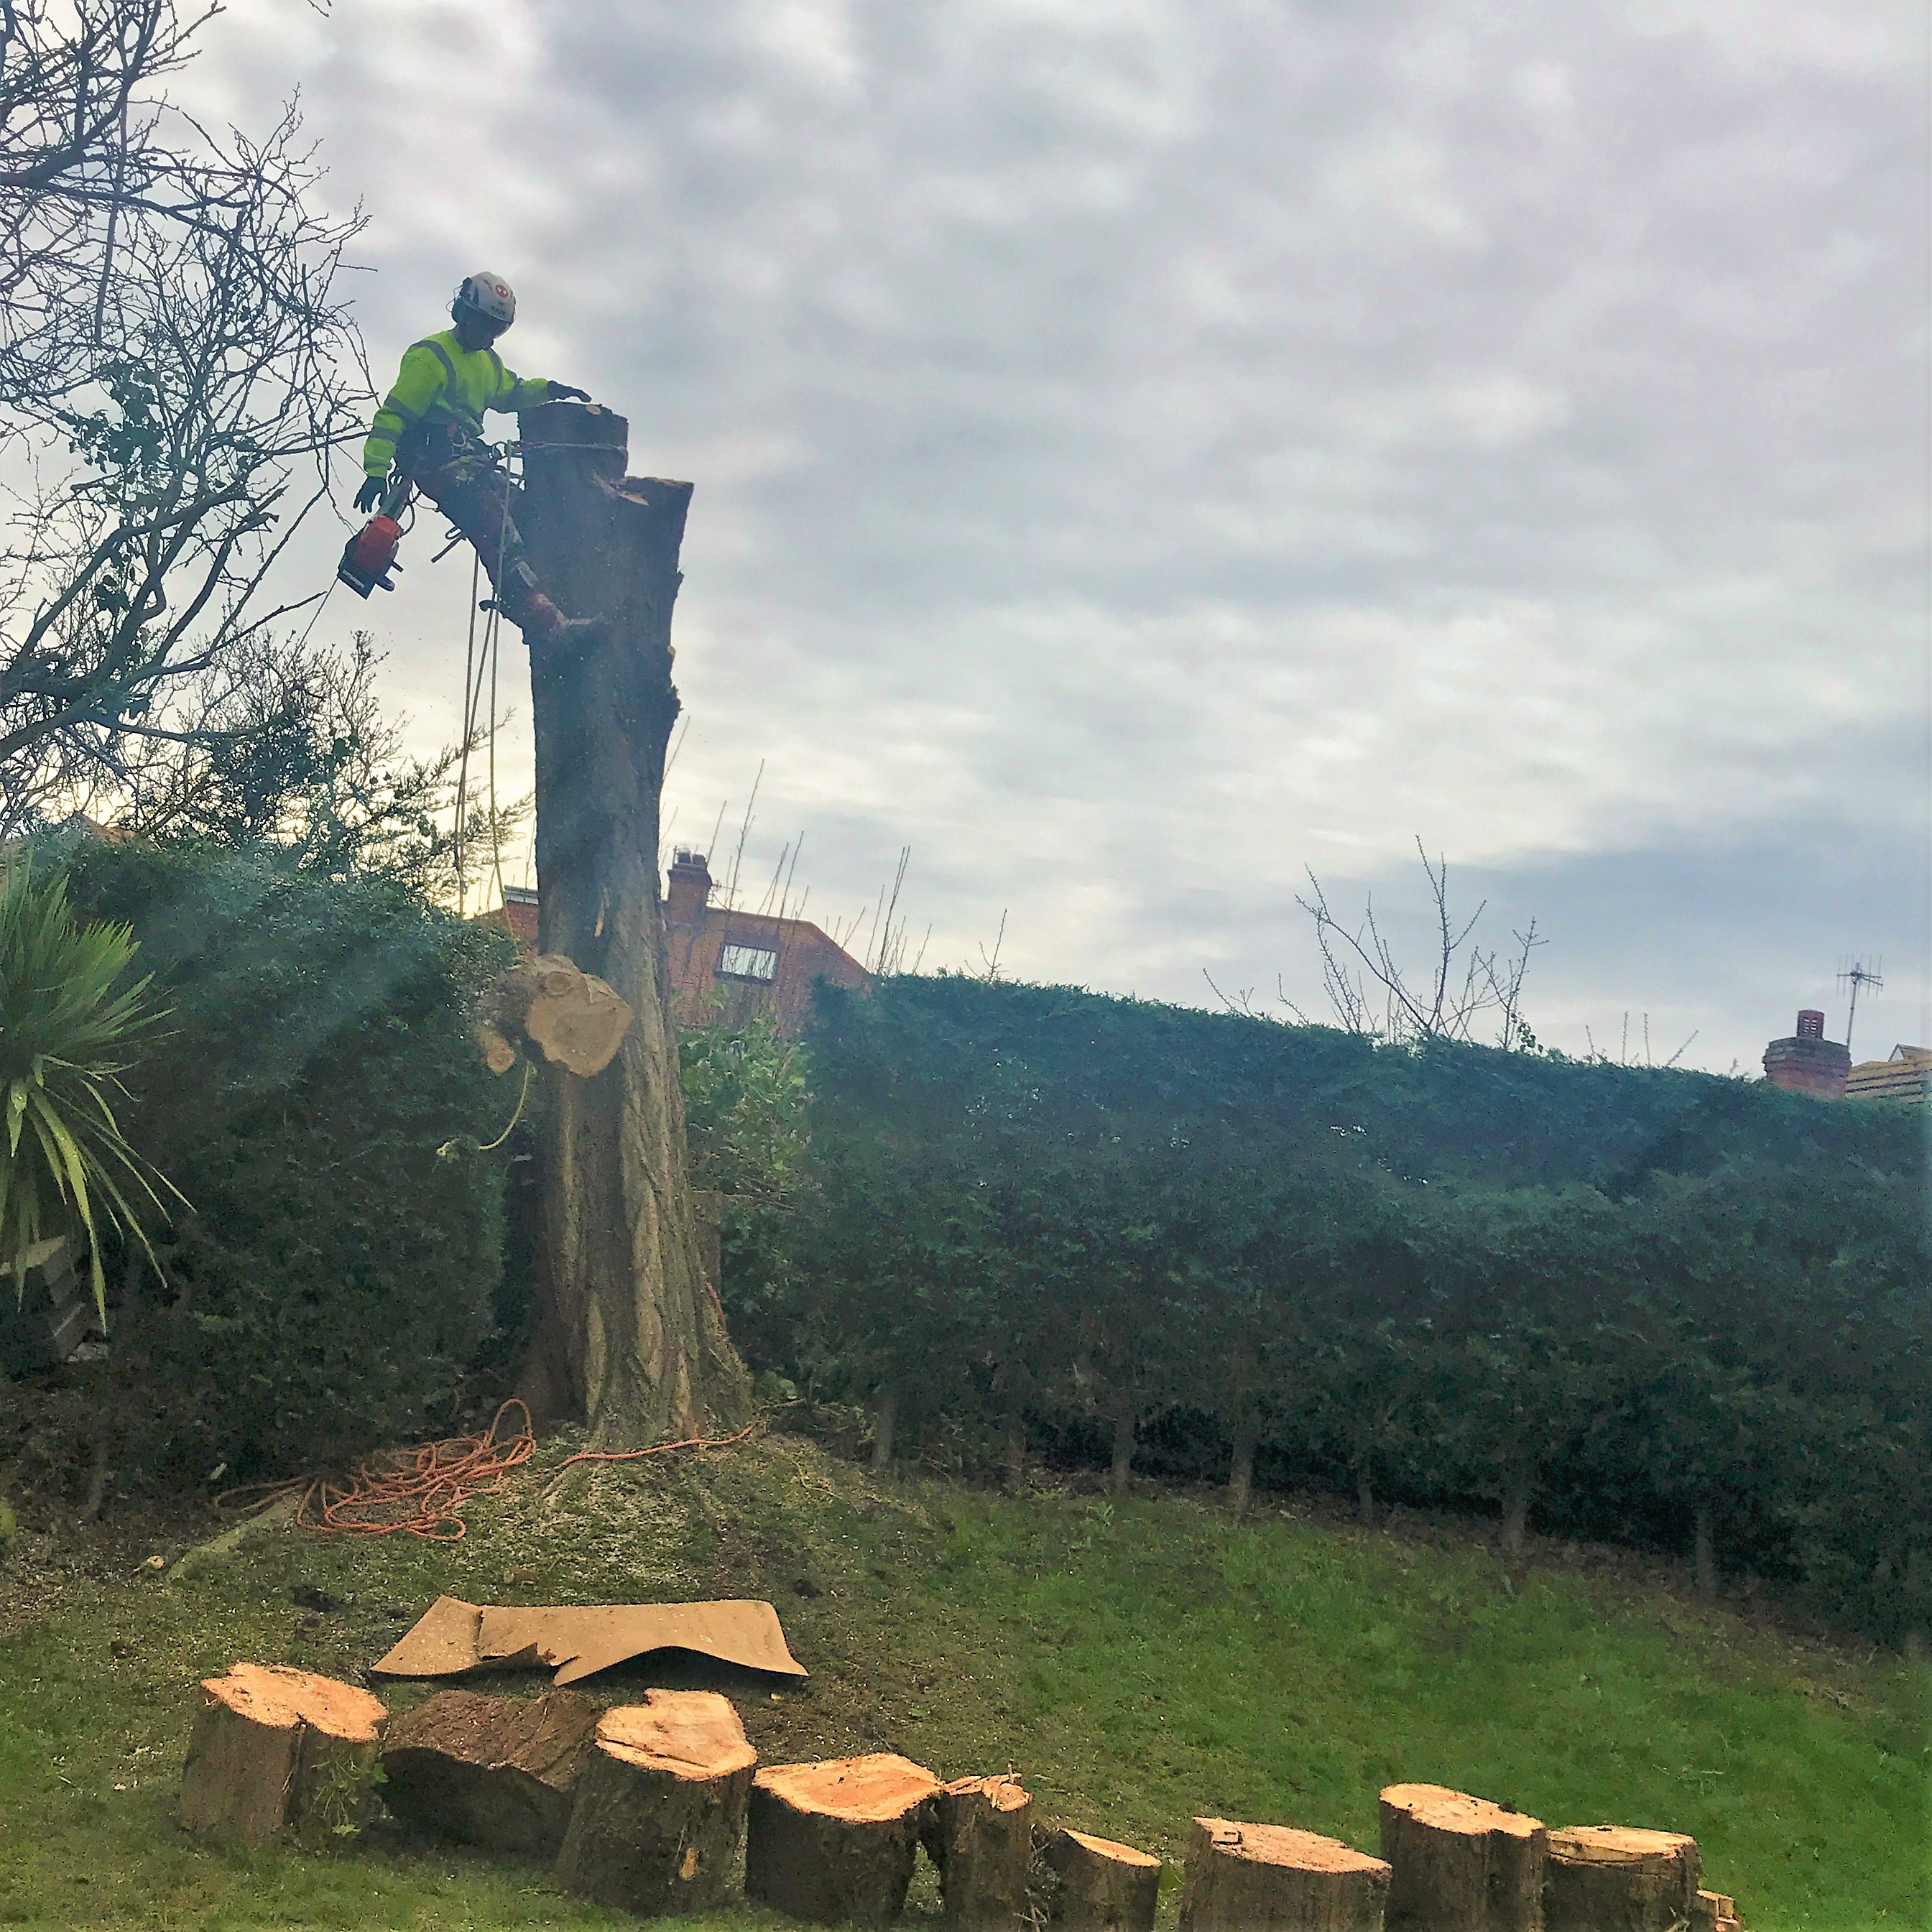 Emergency tree surgeons Dorset Treeworx Ltd covering Weymouth, Dorchester, Portland, Dorset - making safe trees that have broken and hanging branches, split trees, wind damage and clearing fallen and uprooted trees.